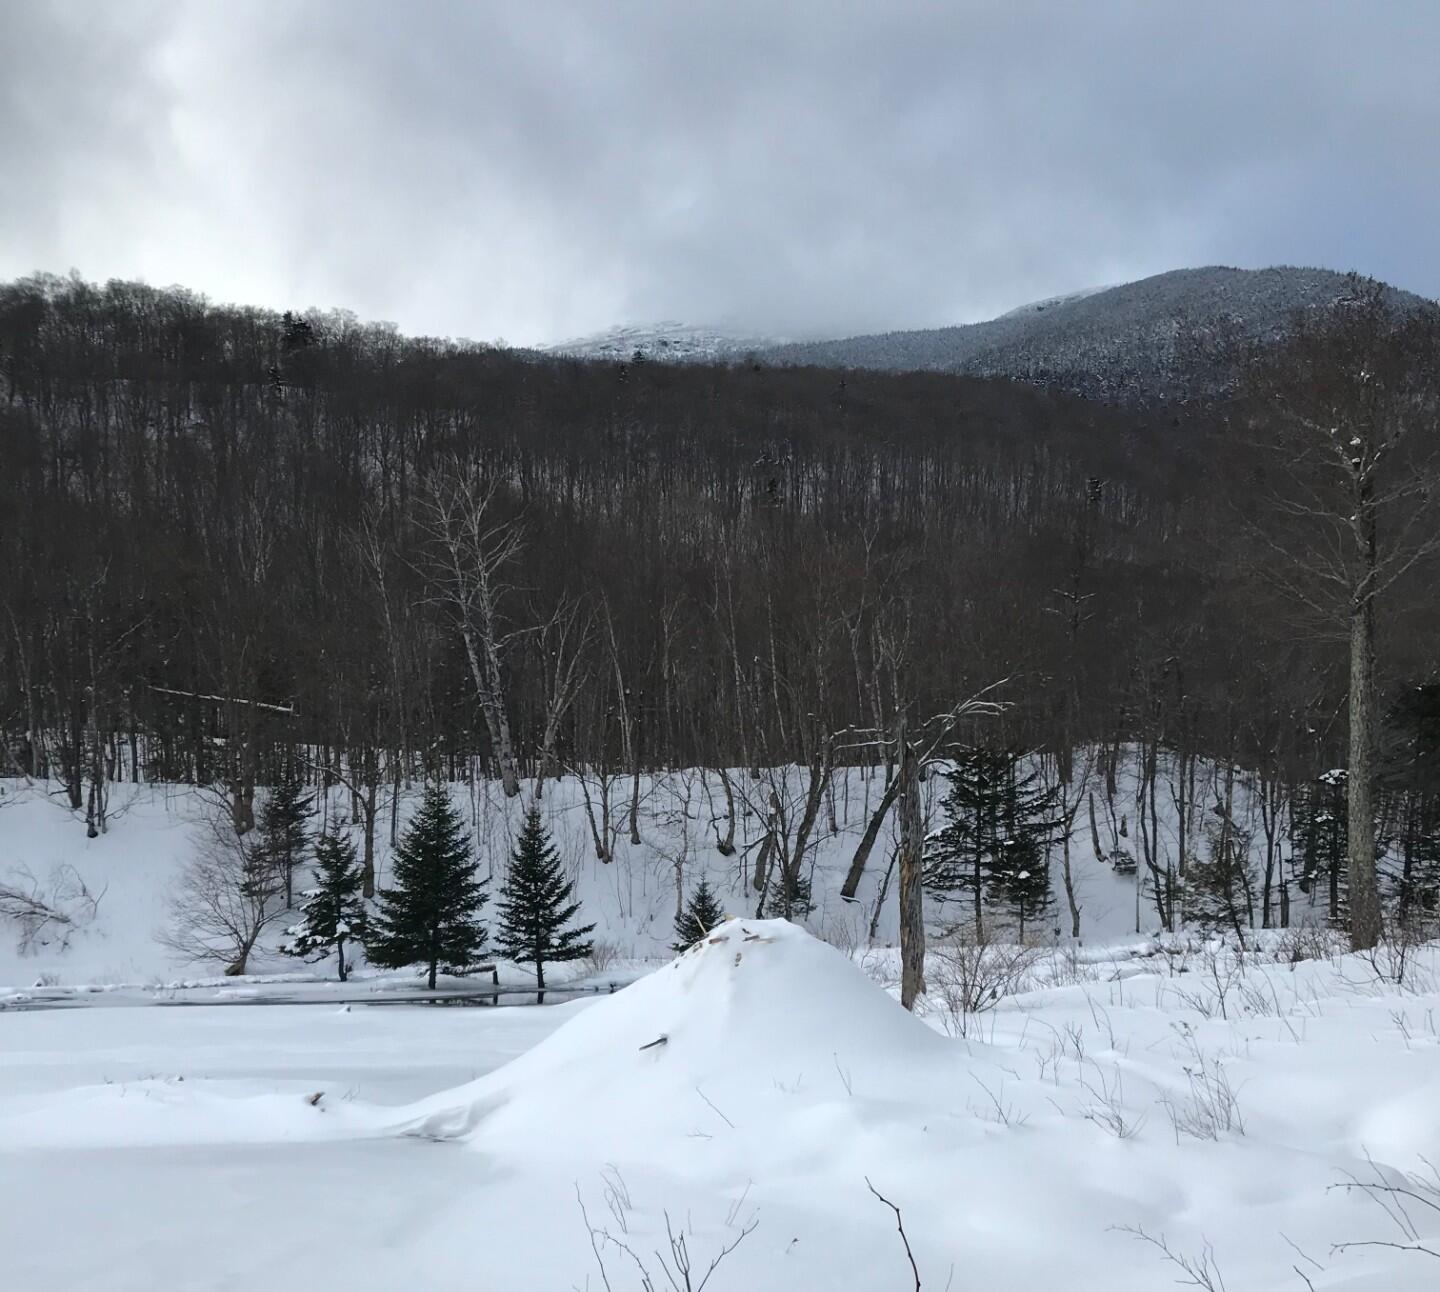 Snow-covered beaver lodge in Stowe, VT.